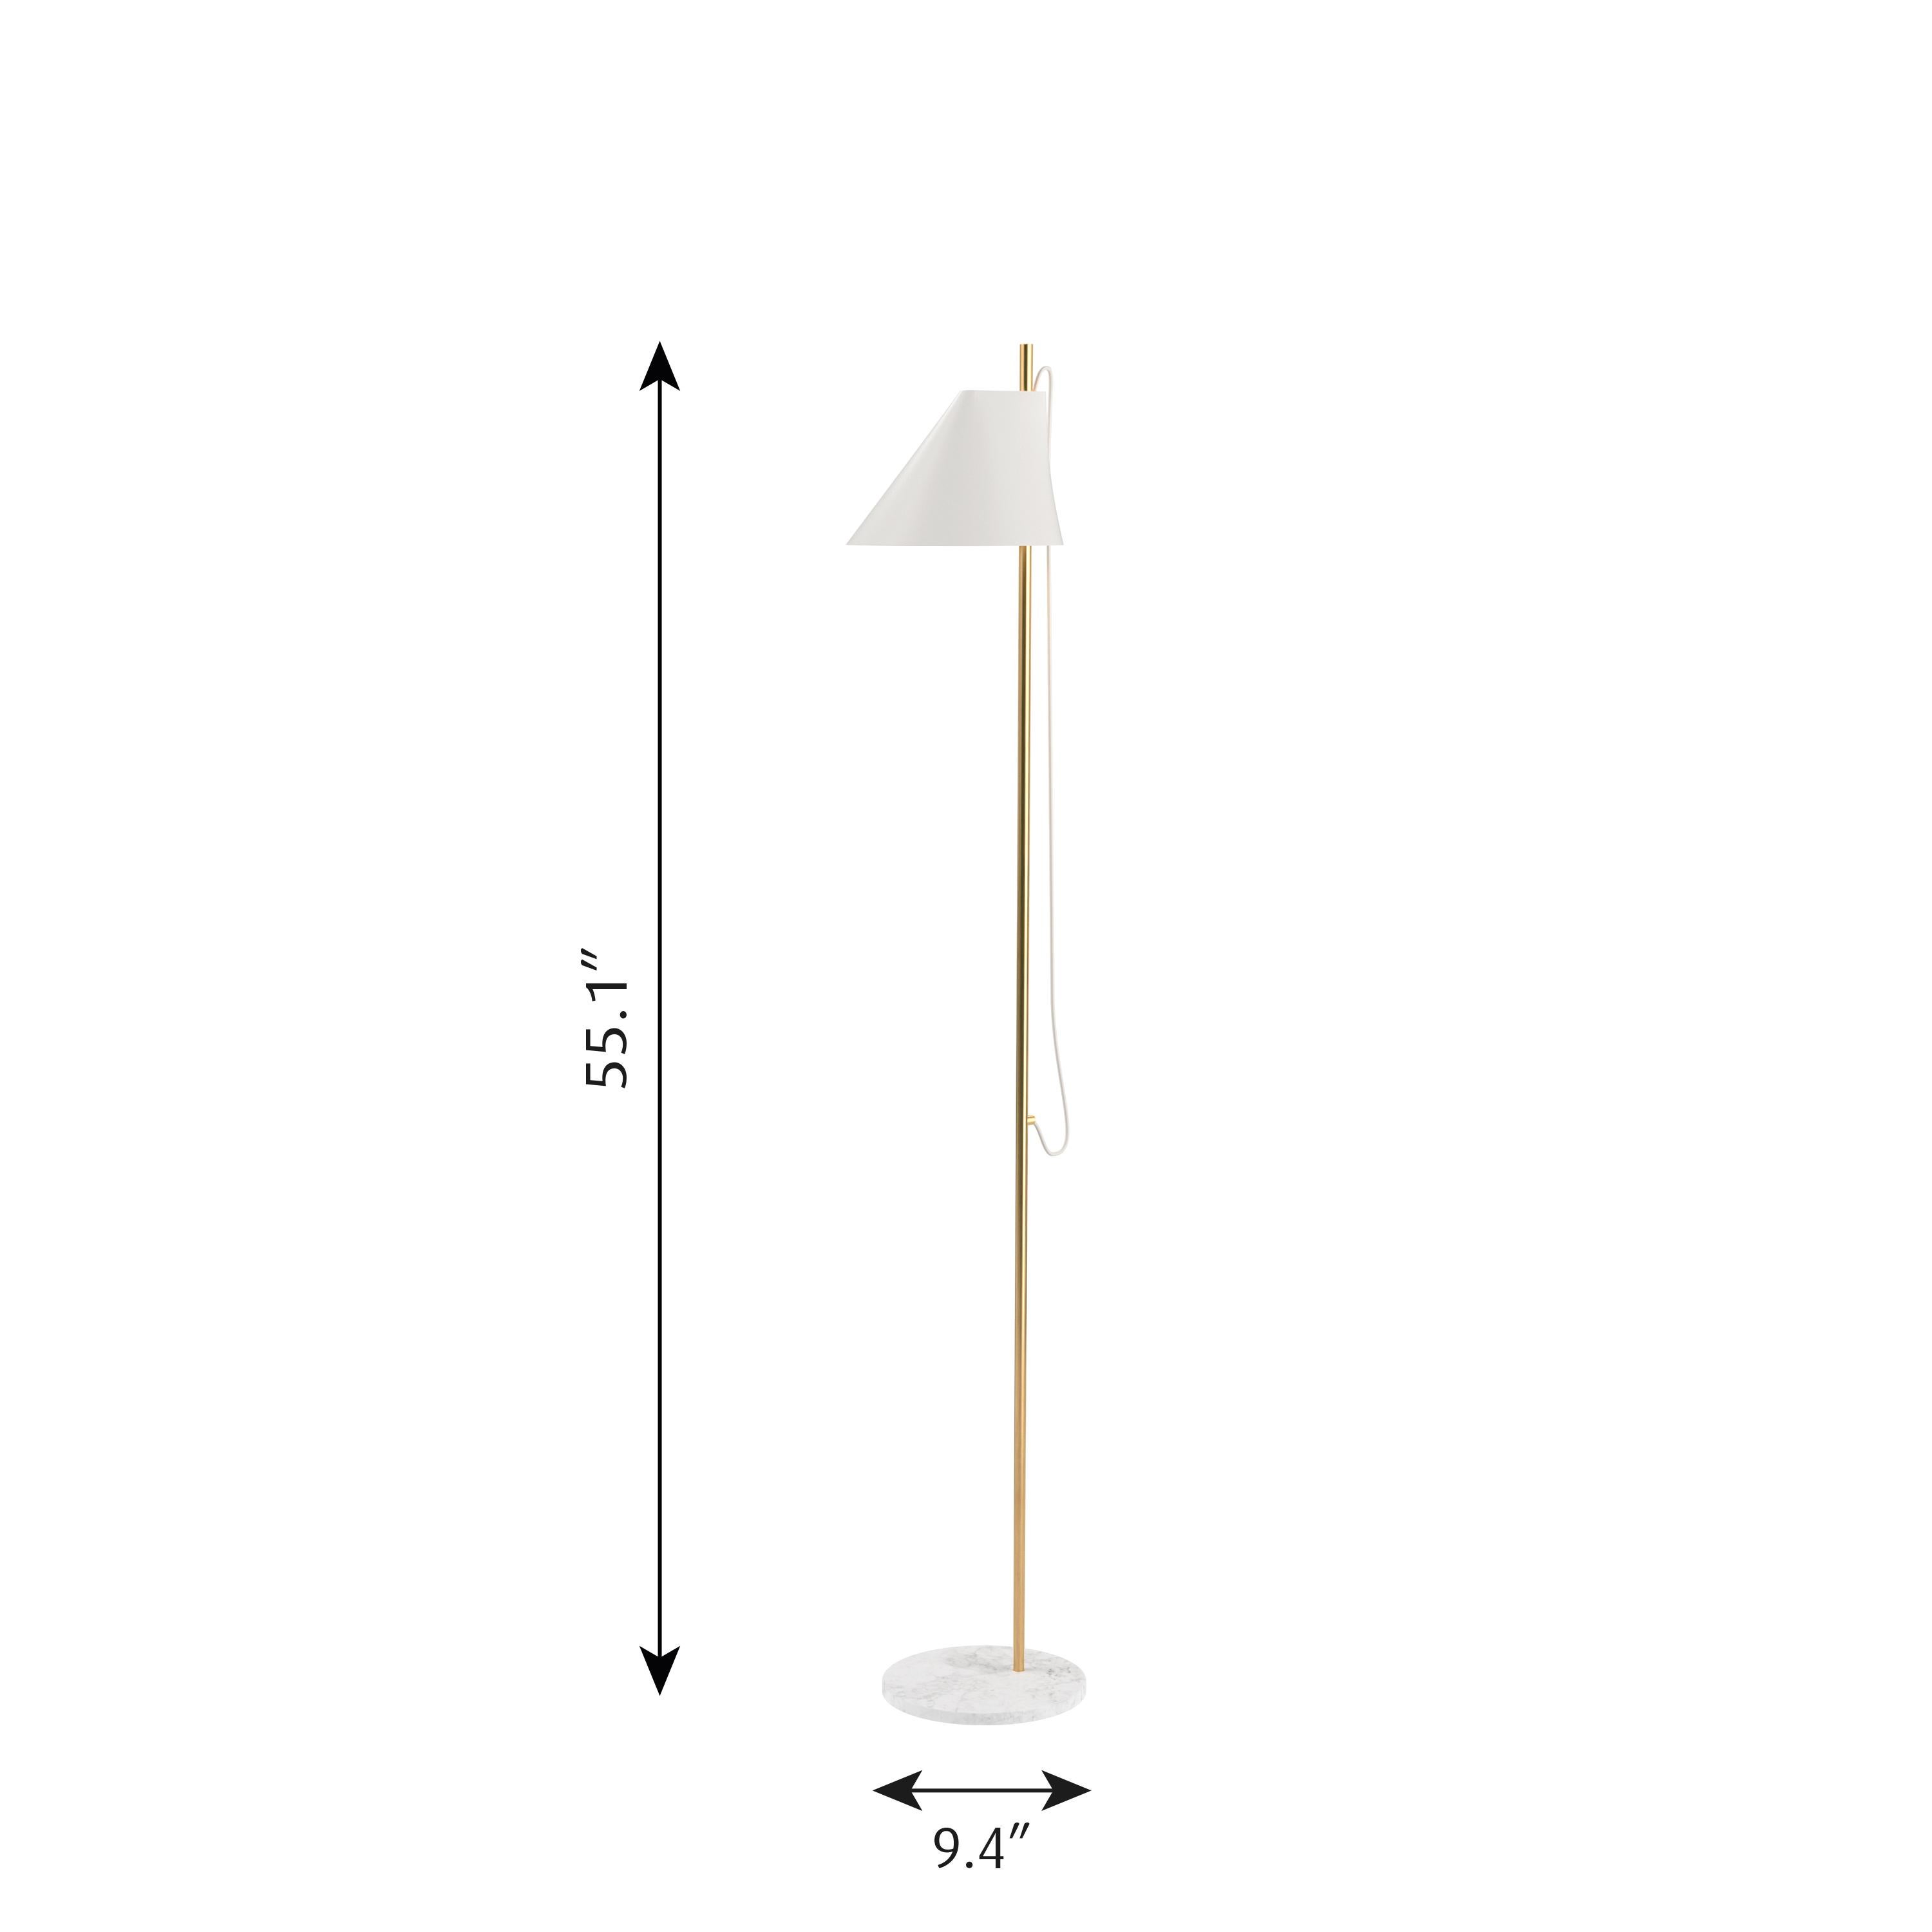 GamFratesi white 'YUH' brass and marble floor lamp for Louis Poulsen. Designed by Stine Gam and Enrico Fratesi, the YUH reflects Louis Poulsen’s philosophy of designing to shape light. Inspired by the classic virtues of Danish Modernism, Poul